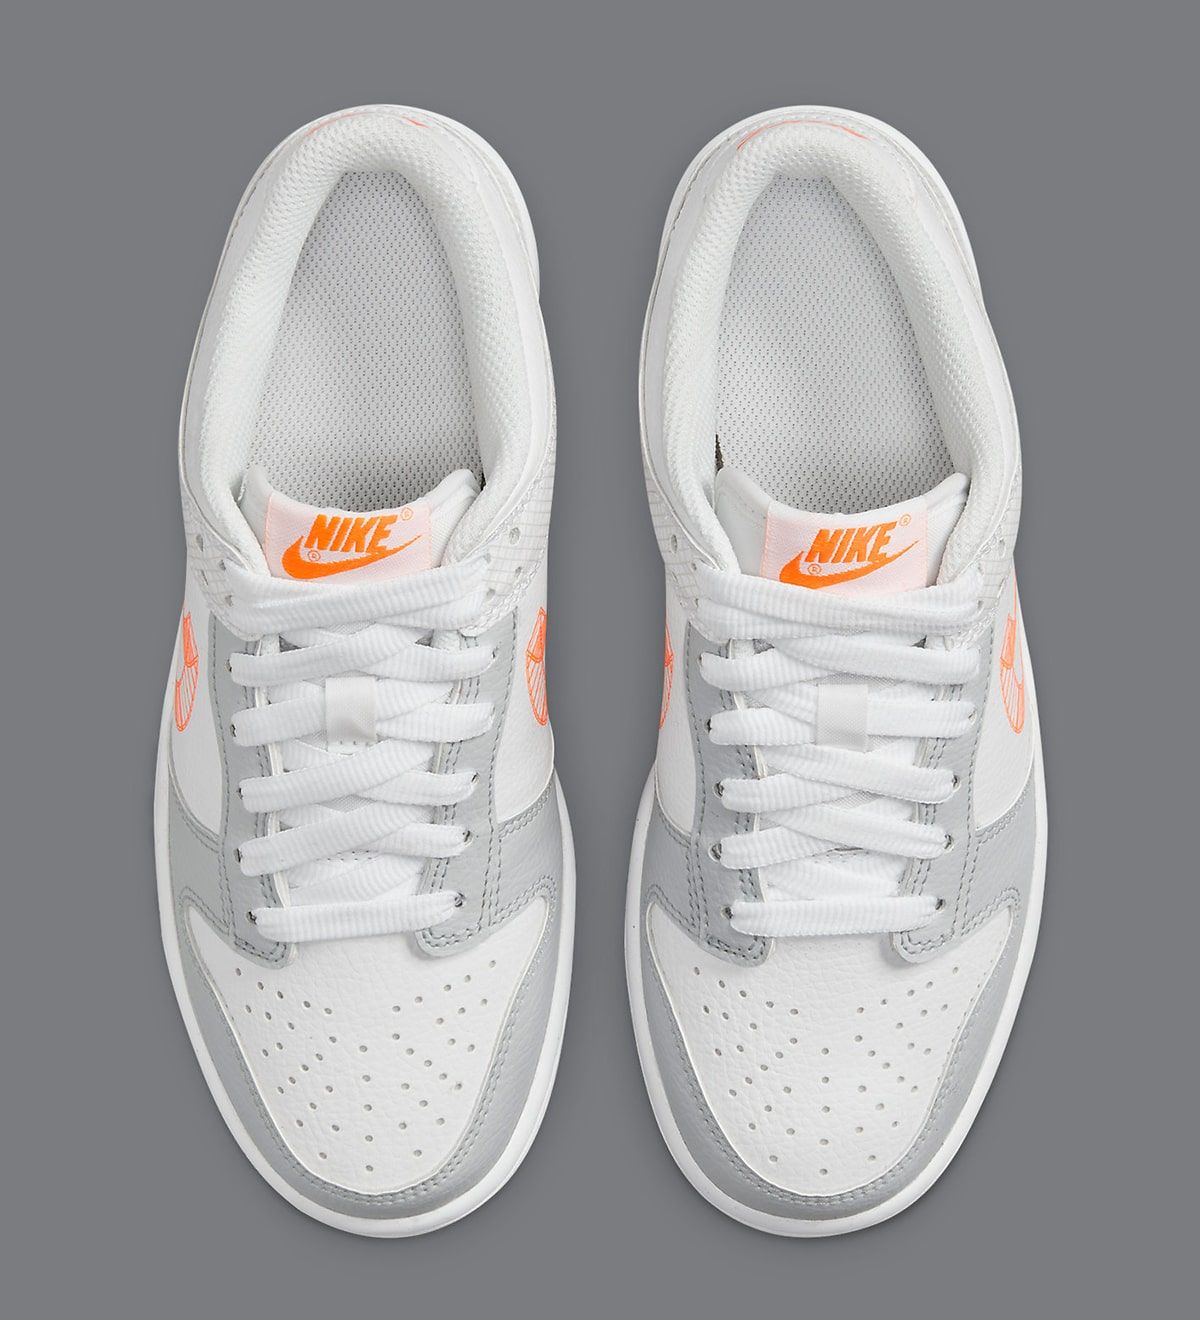 Nike Dunk Low “3D Swoosh” Surfaces! | House of Heat°